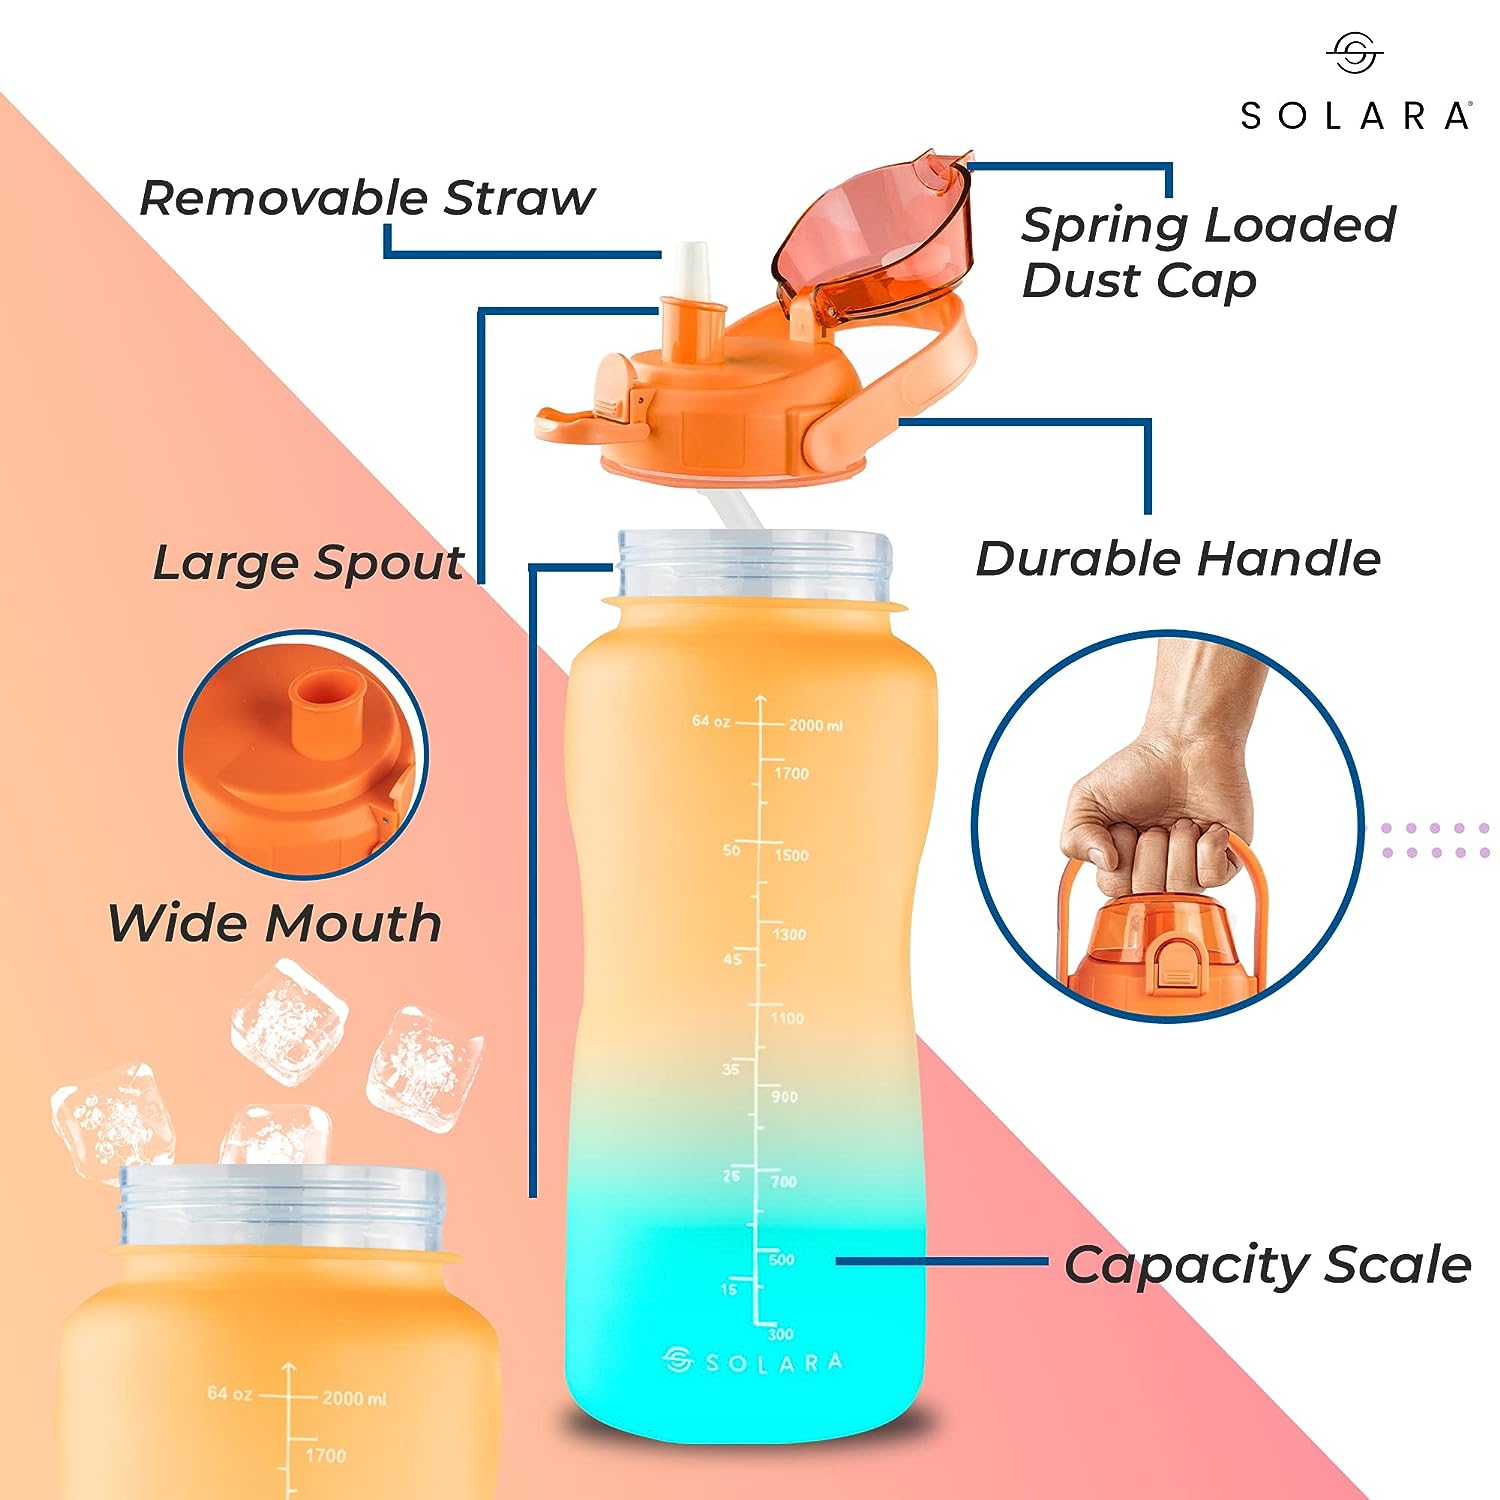 Sipper Bottle 2 Litre with Motivational Time Marker, Leakproof Durable BPA Free Non-Toxic Bottle for Office, Gym